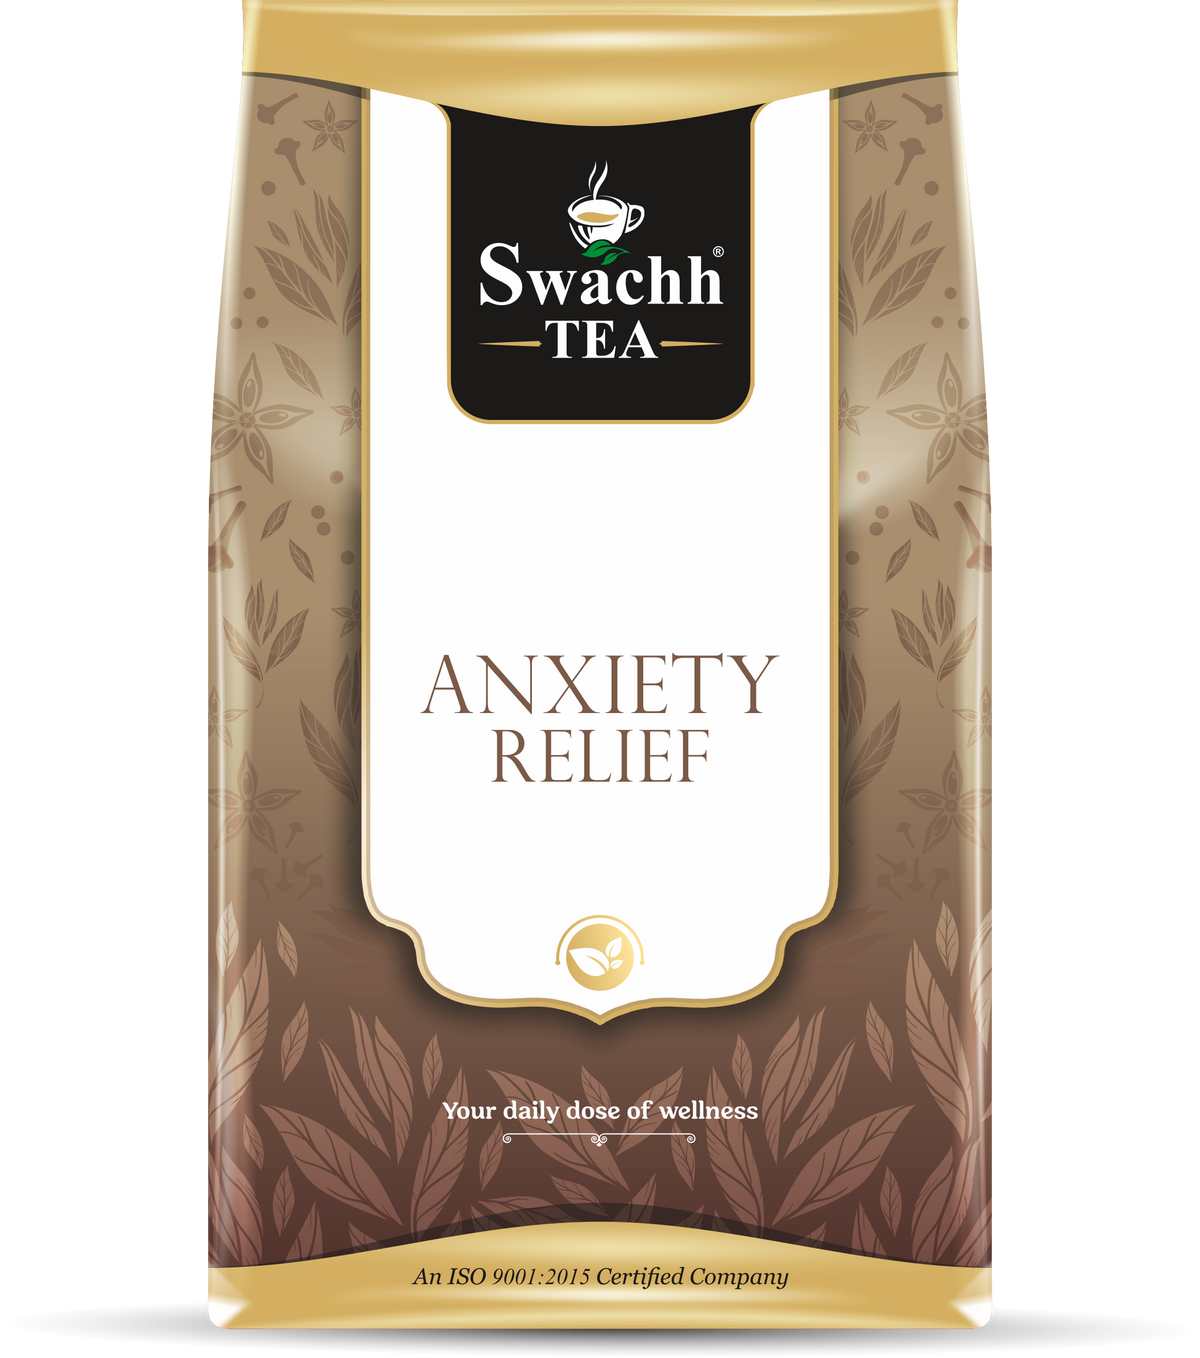 Anxiety relief herbal tea (Relax and calming)